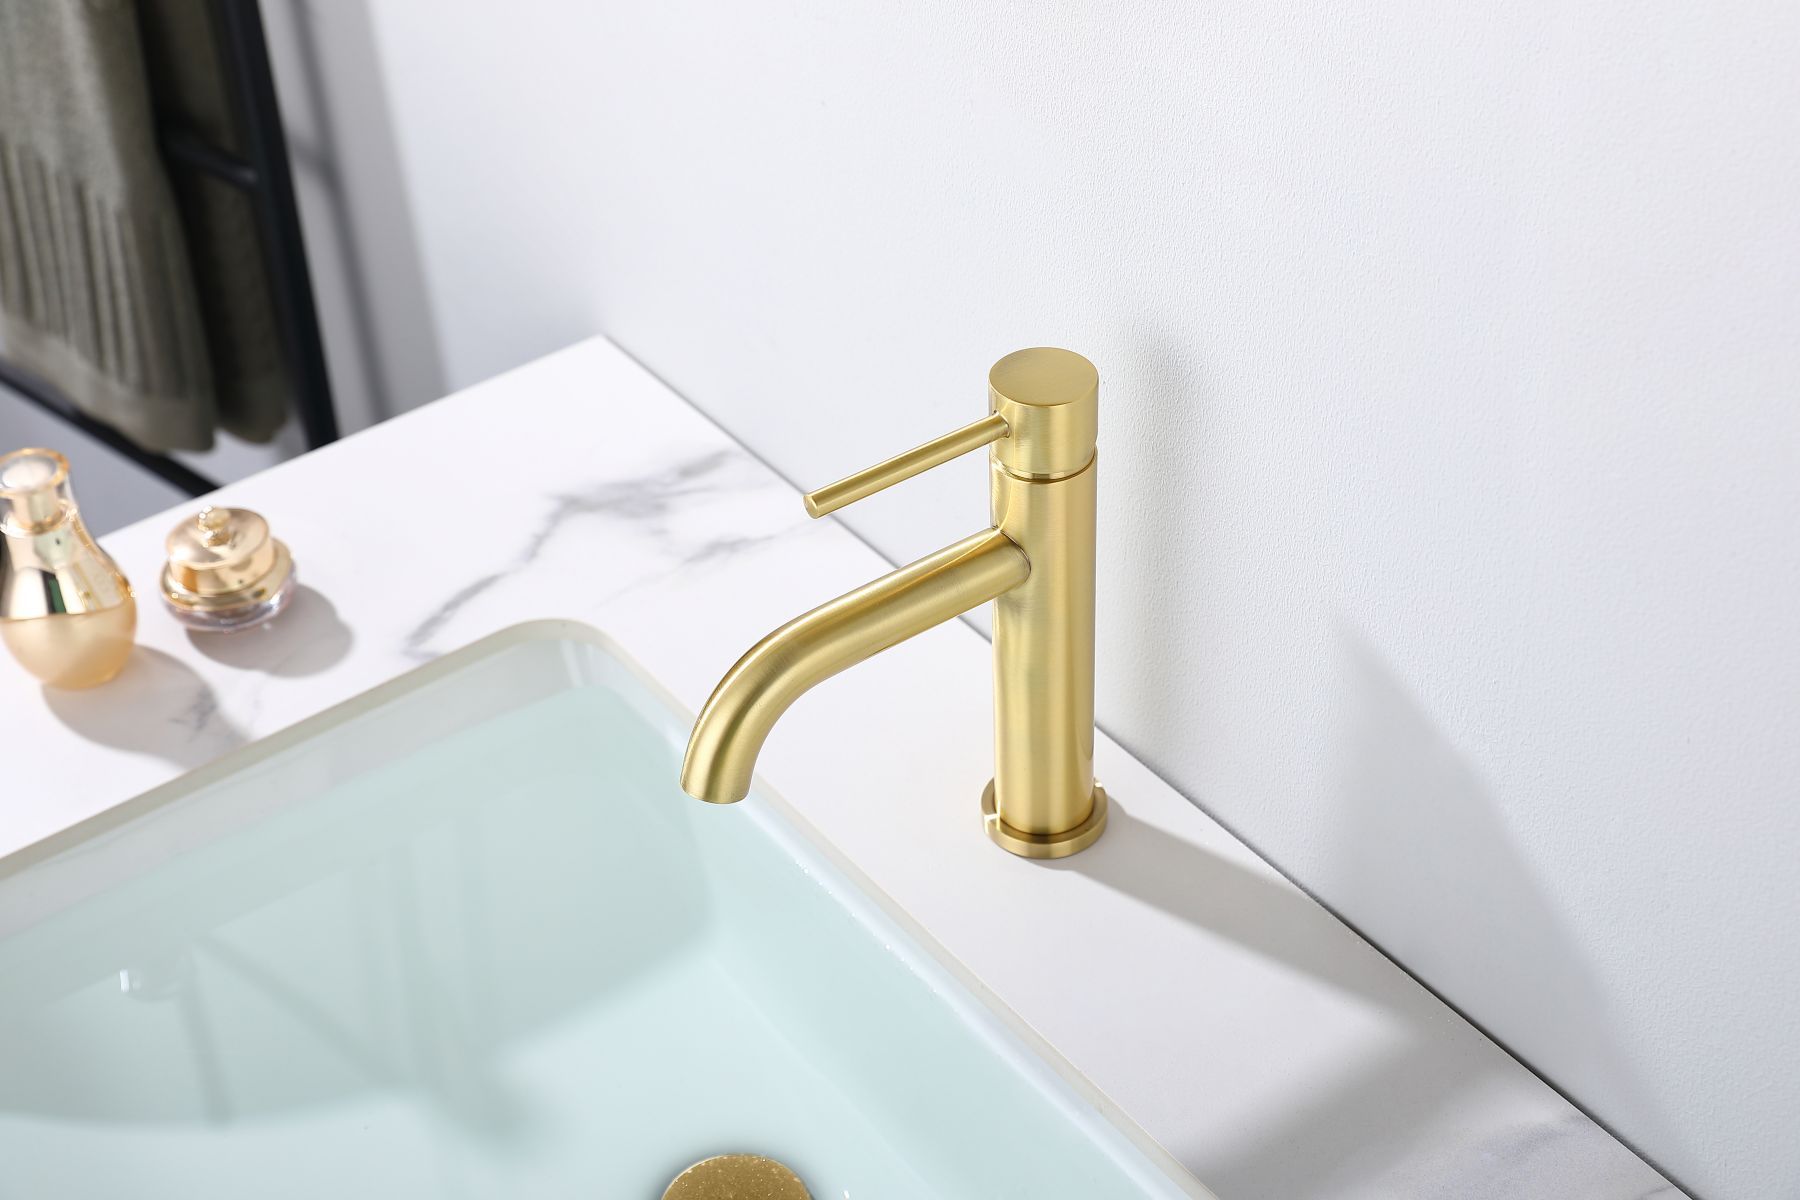 Solid Brass Gold Finish Bathroom Faucets